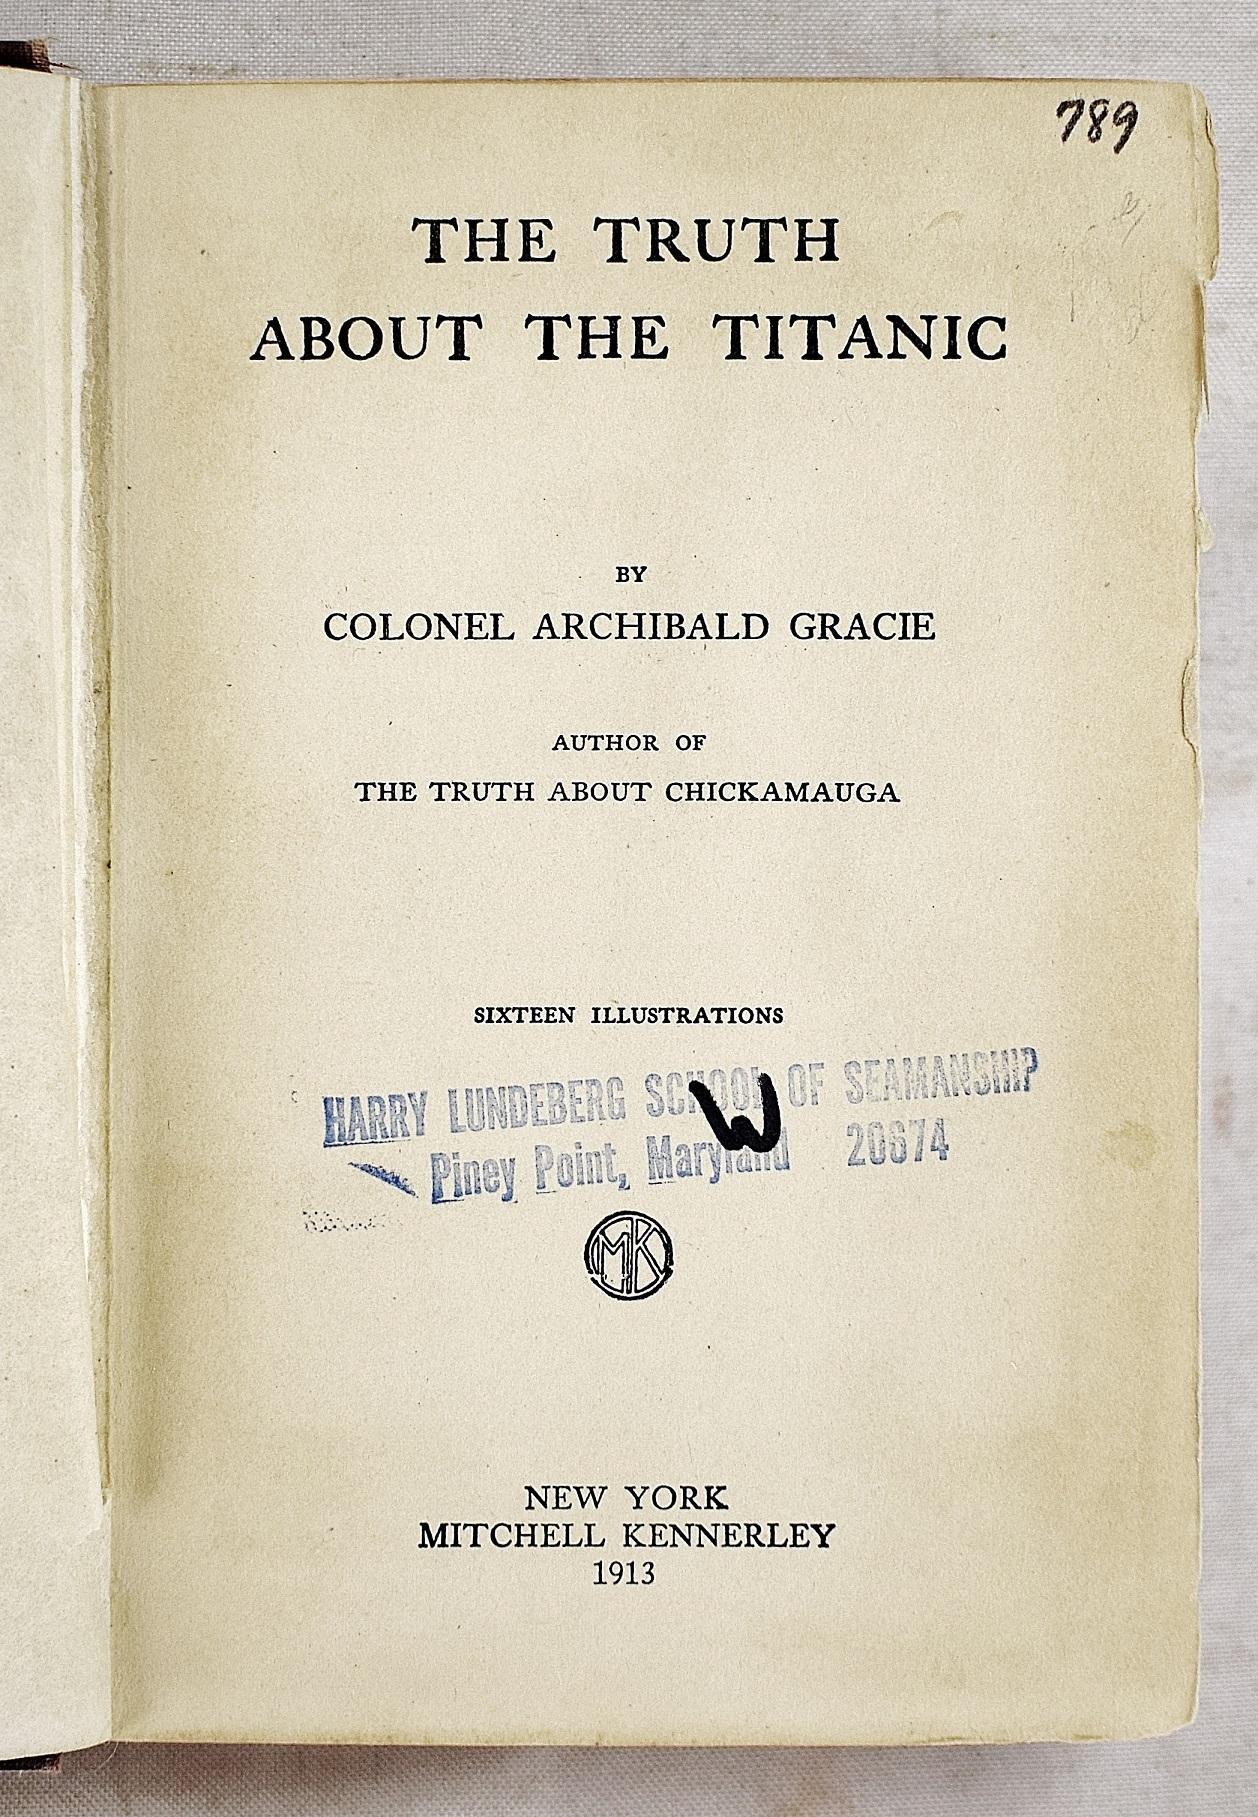 the-truth-about-the-titanic-by-gracie-colonel-archibald-fair